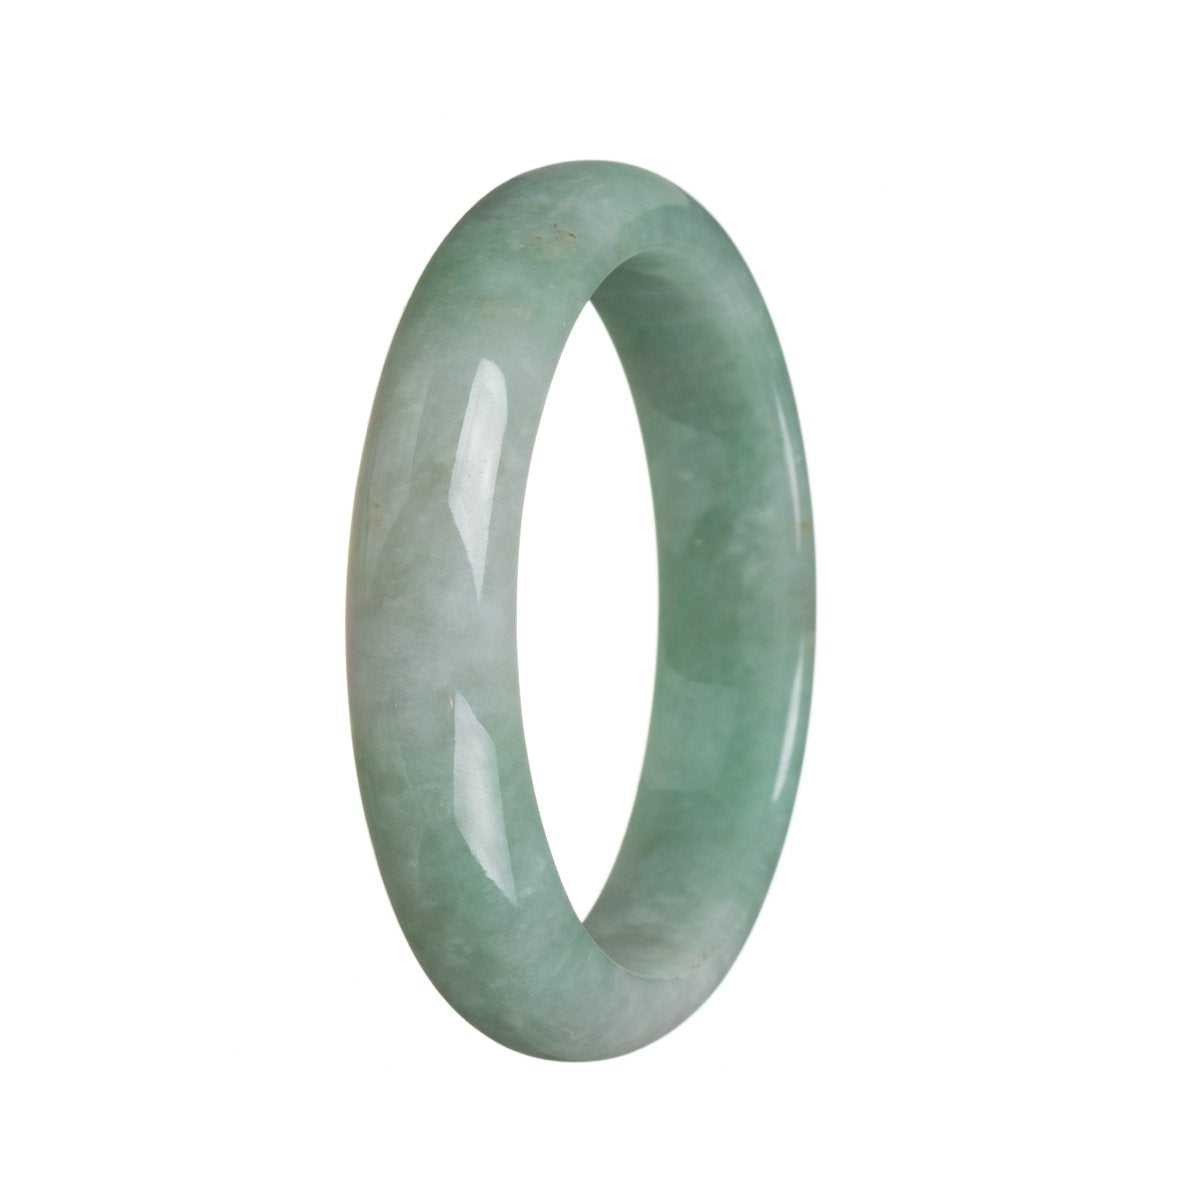 A close-up photo of a half moon-shaped green jadeite bangle with a diameter of 57mm. The bangle is made of genuine Type A jadeite and has a smooth, polished surface. It features a vibrant green color and is a product of MAYS™.